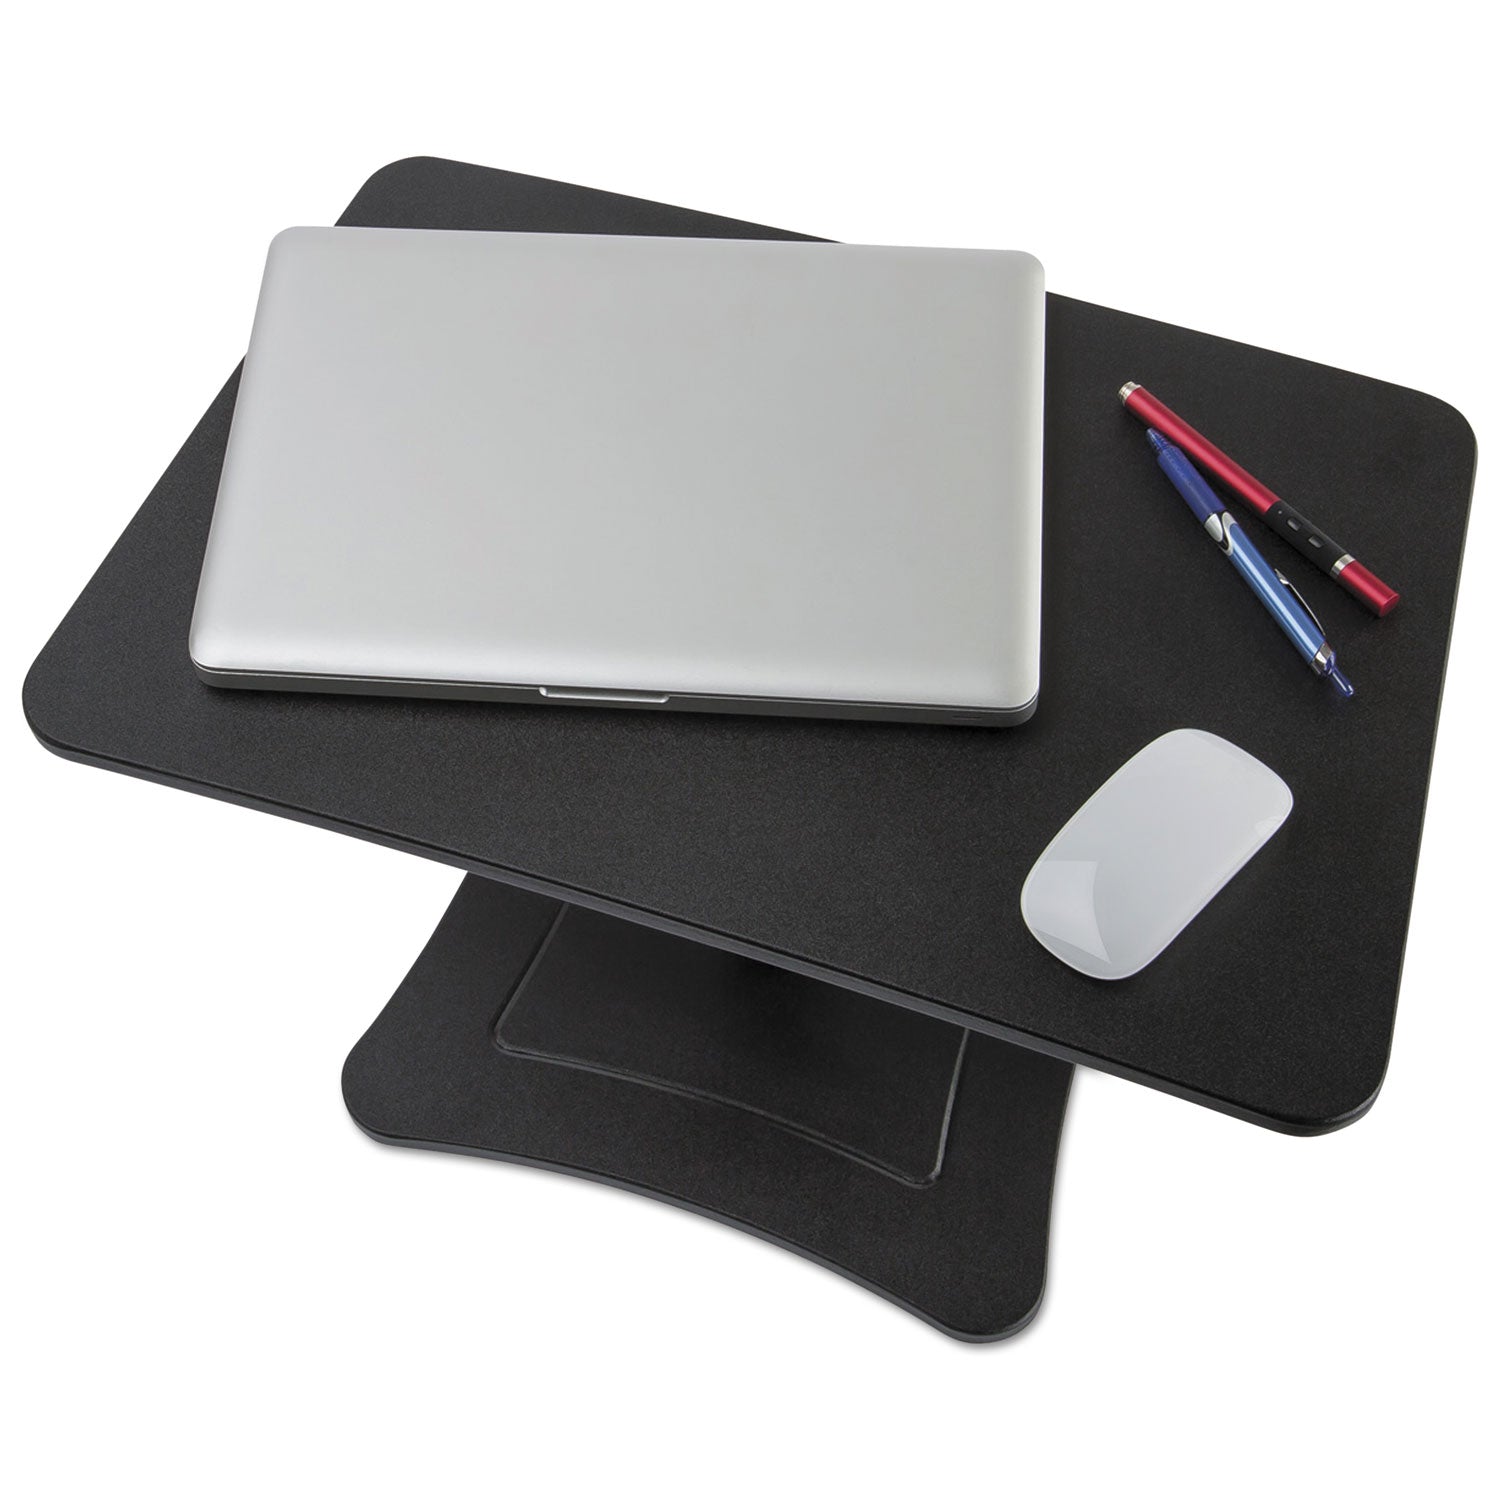 dc230-adjustable-laptop-stand-21-x-13-x-12-to-1575-black-supports-20-lbs_vctdc230b - 4